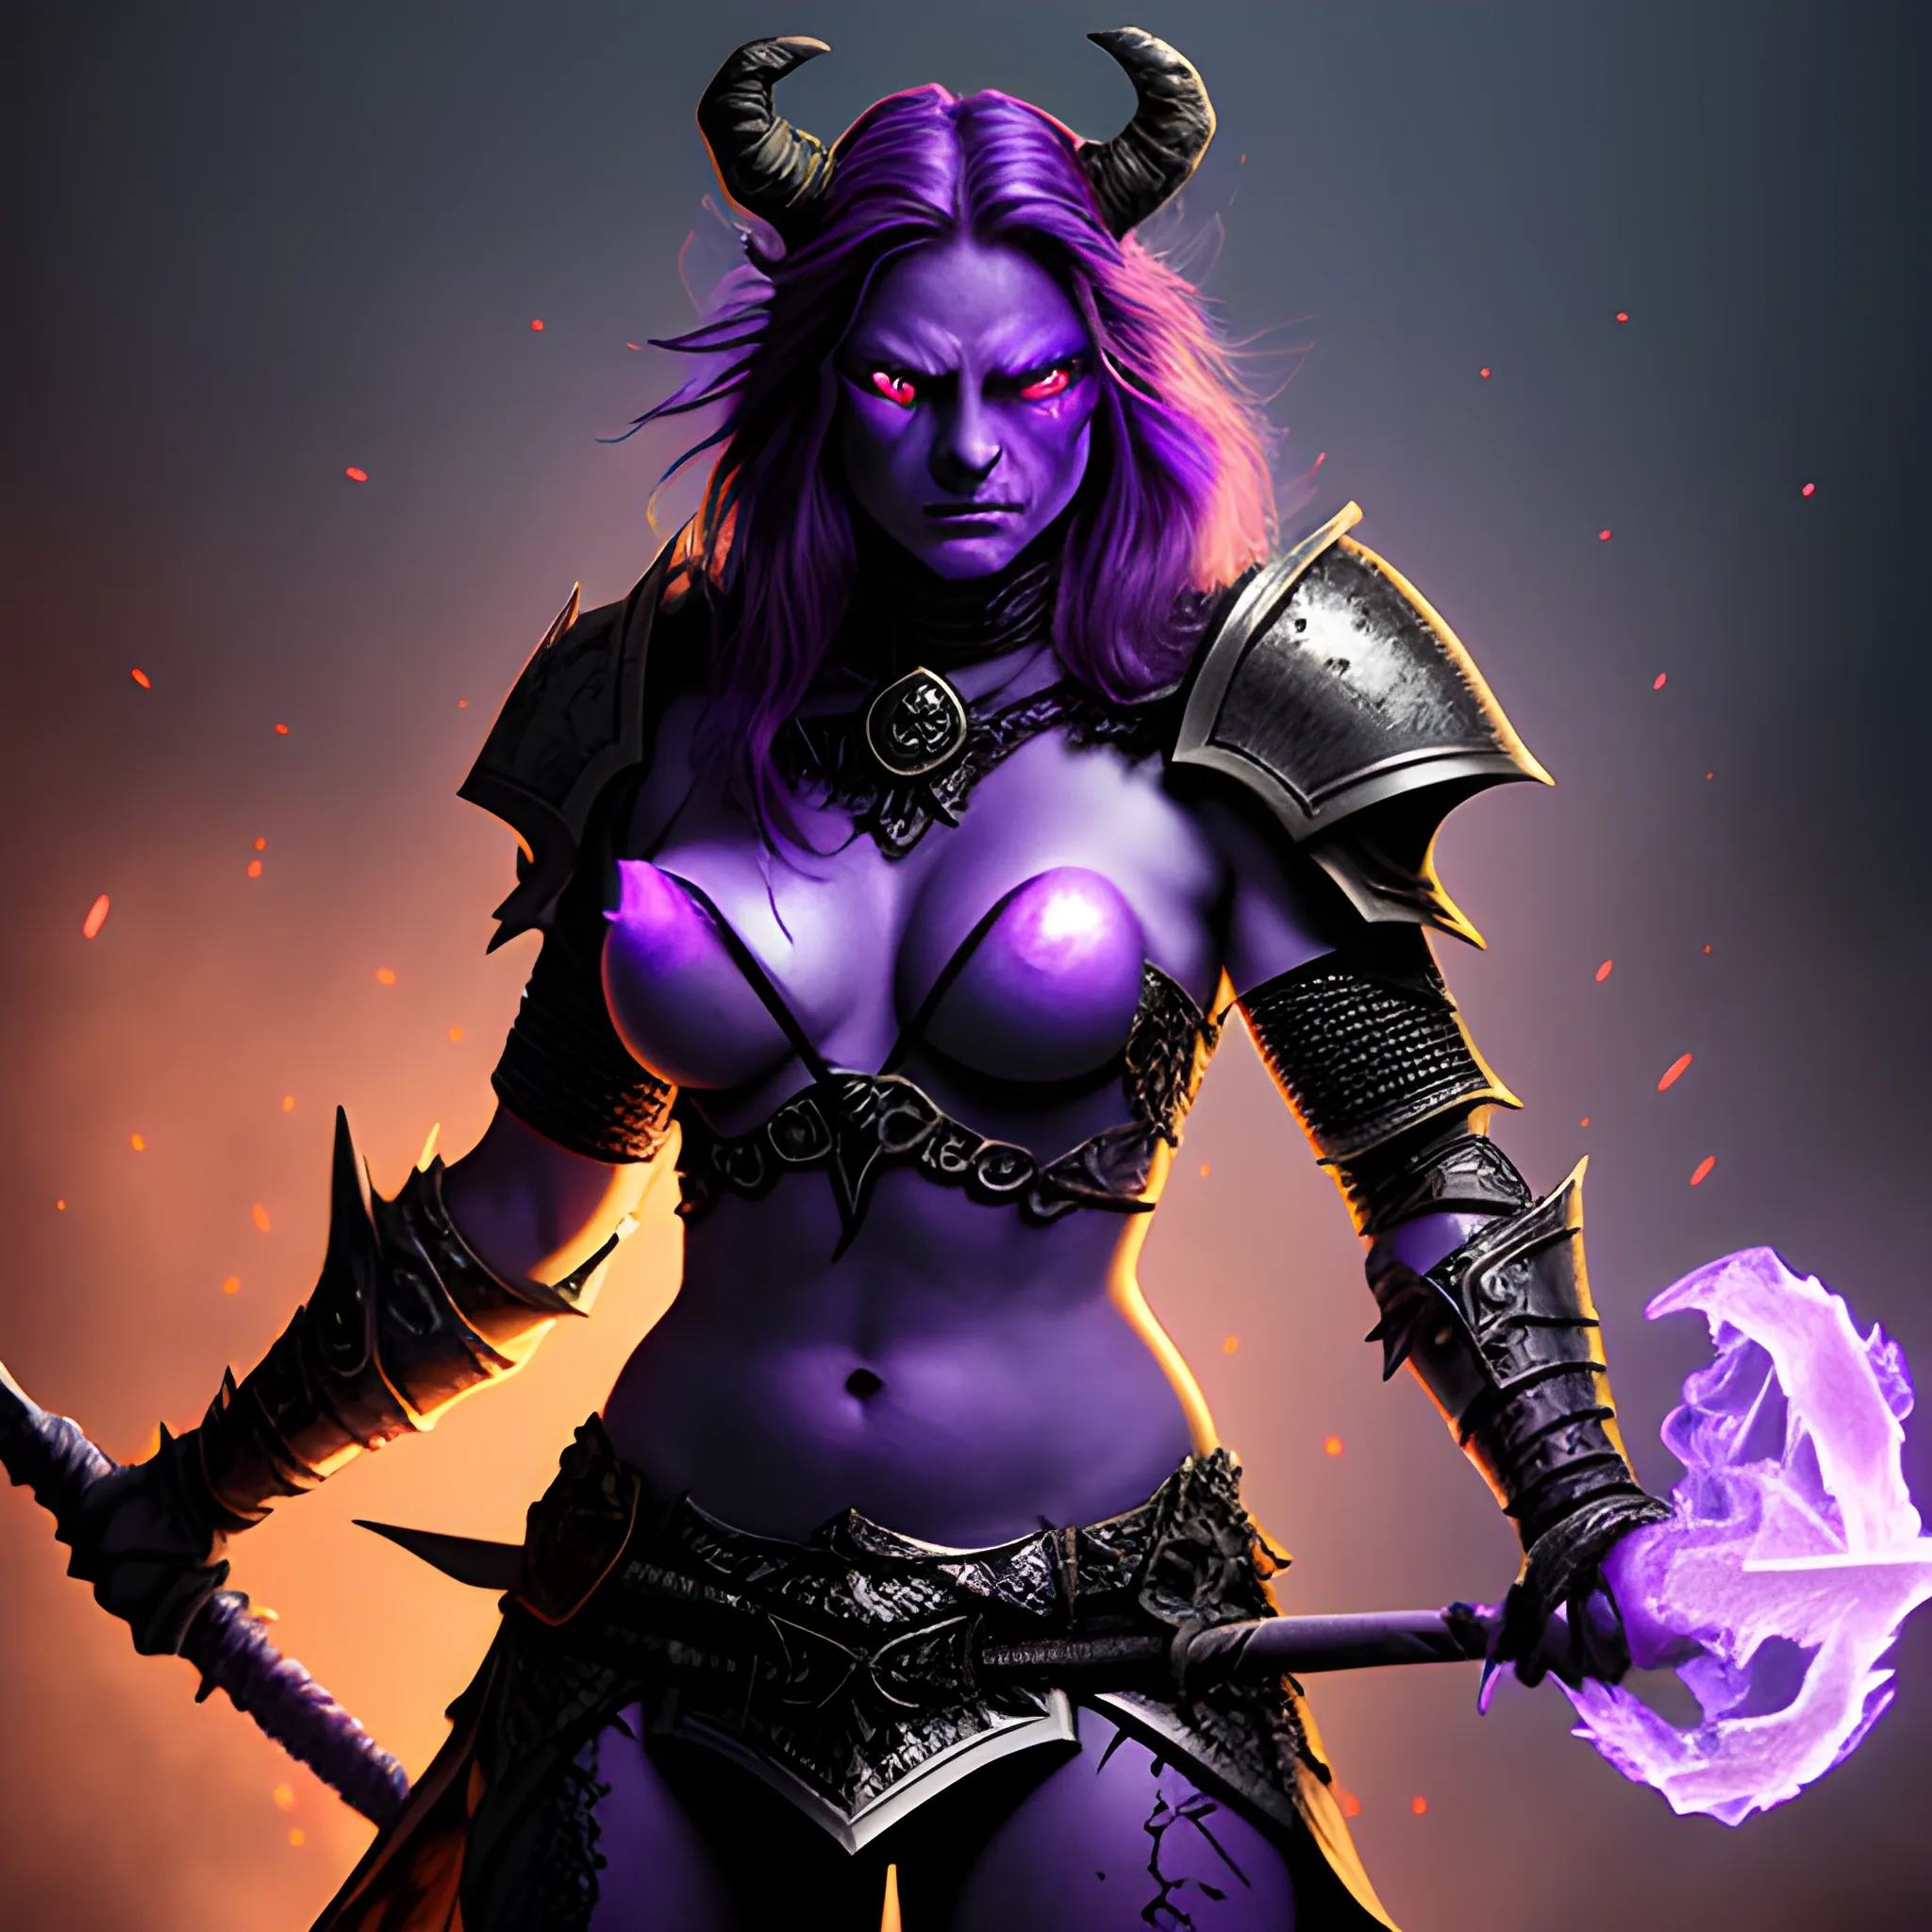 high definition, high fantasy D&D, intimidating purple female demon with glowing eyes, in warrior armor